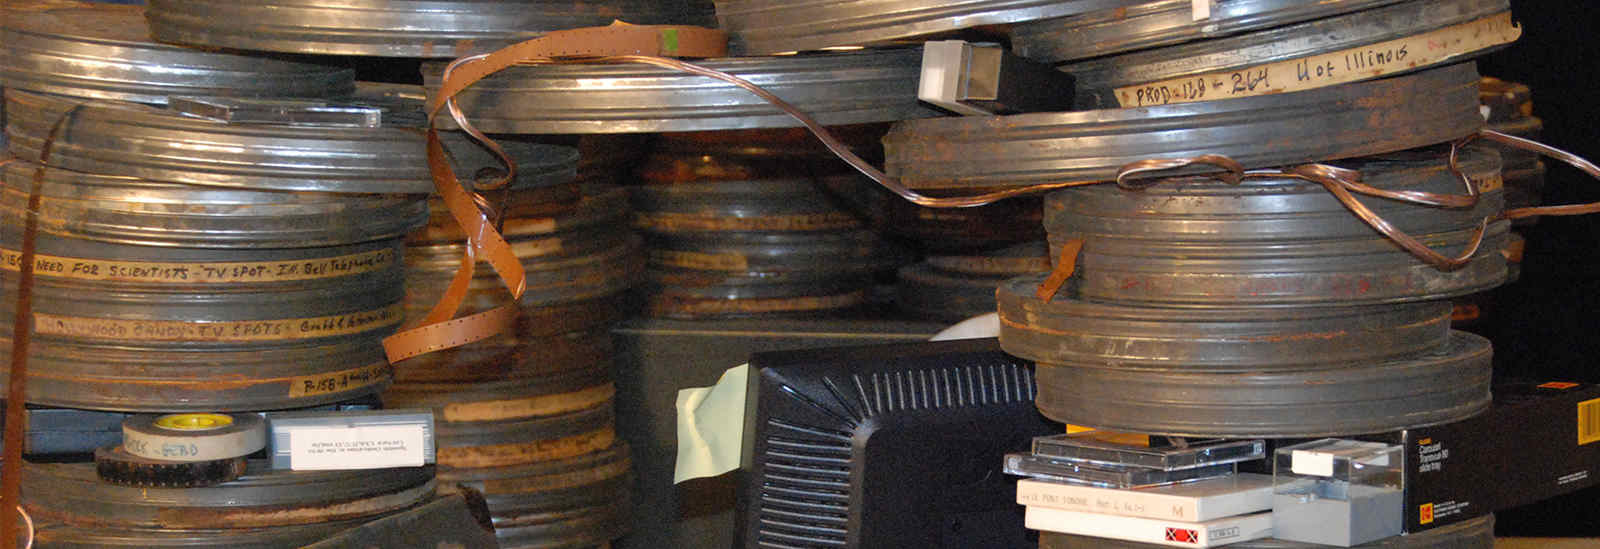 Photograph of old film canisters stacked on desk